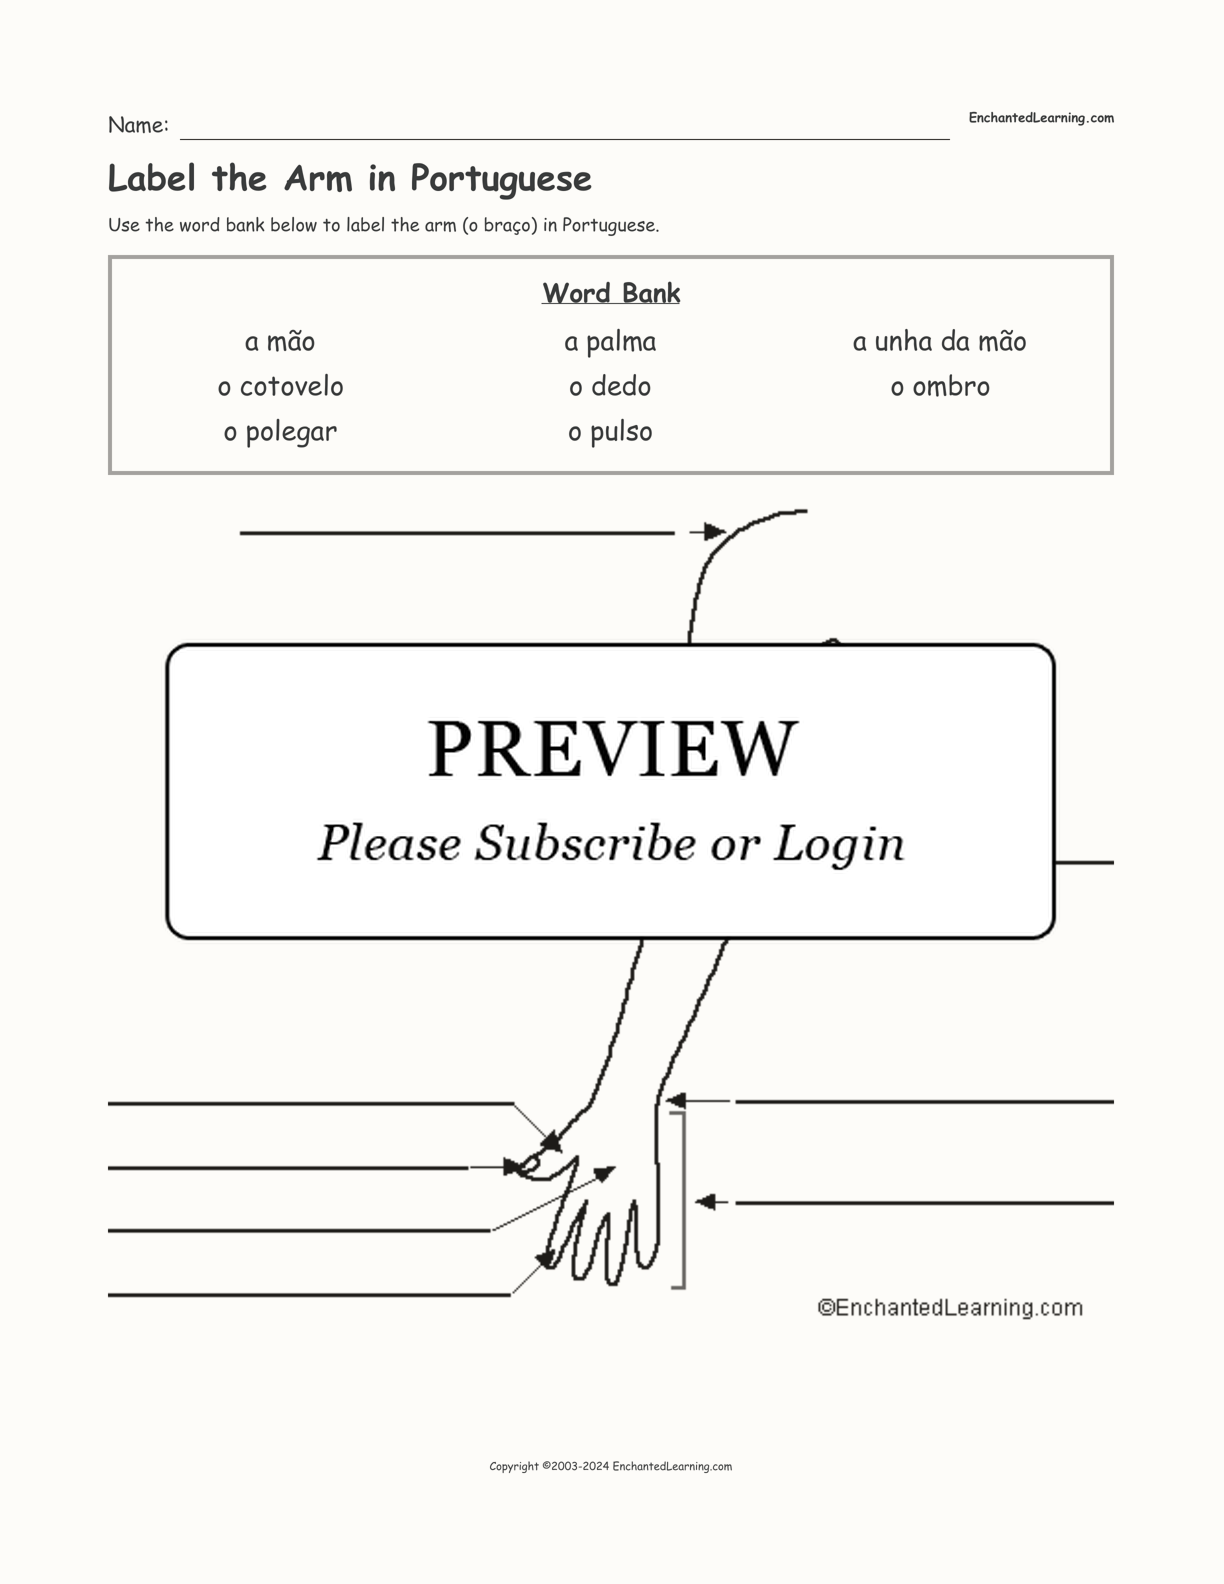 Label the Arm in Portuguese interactive worksheet page 1